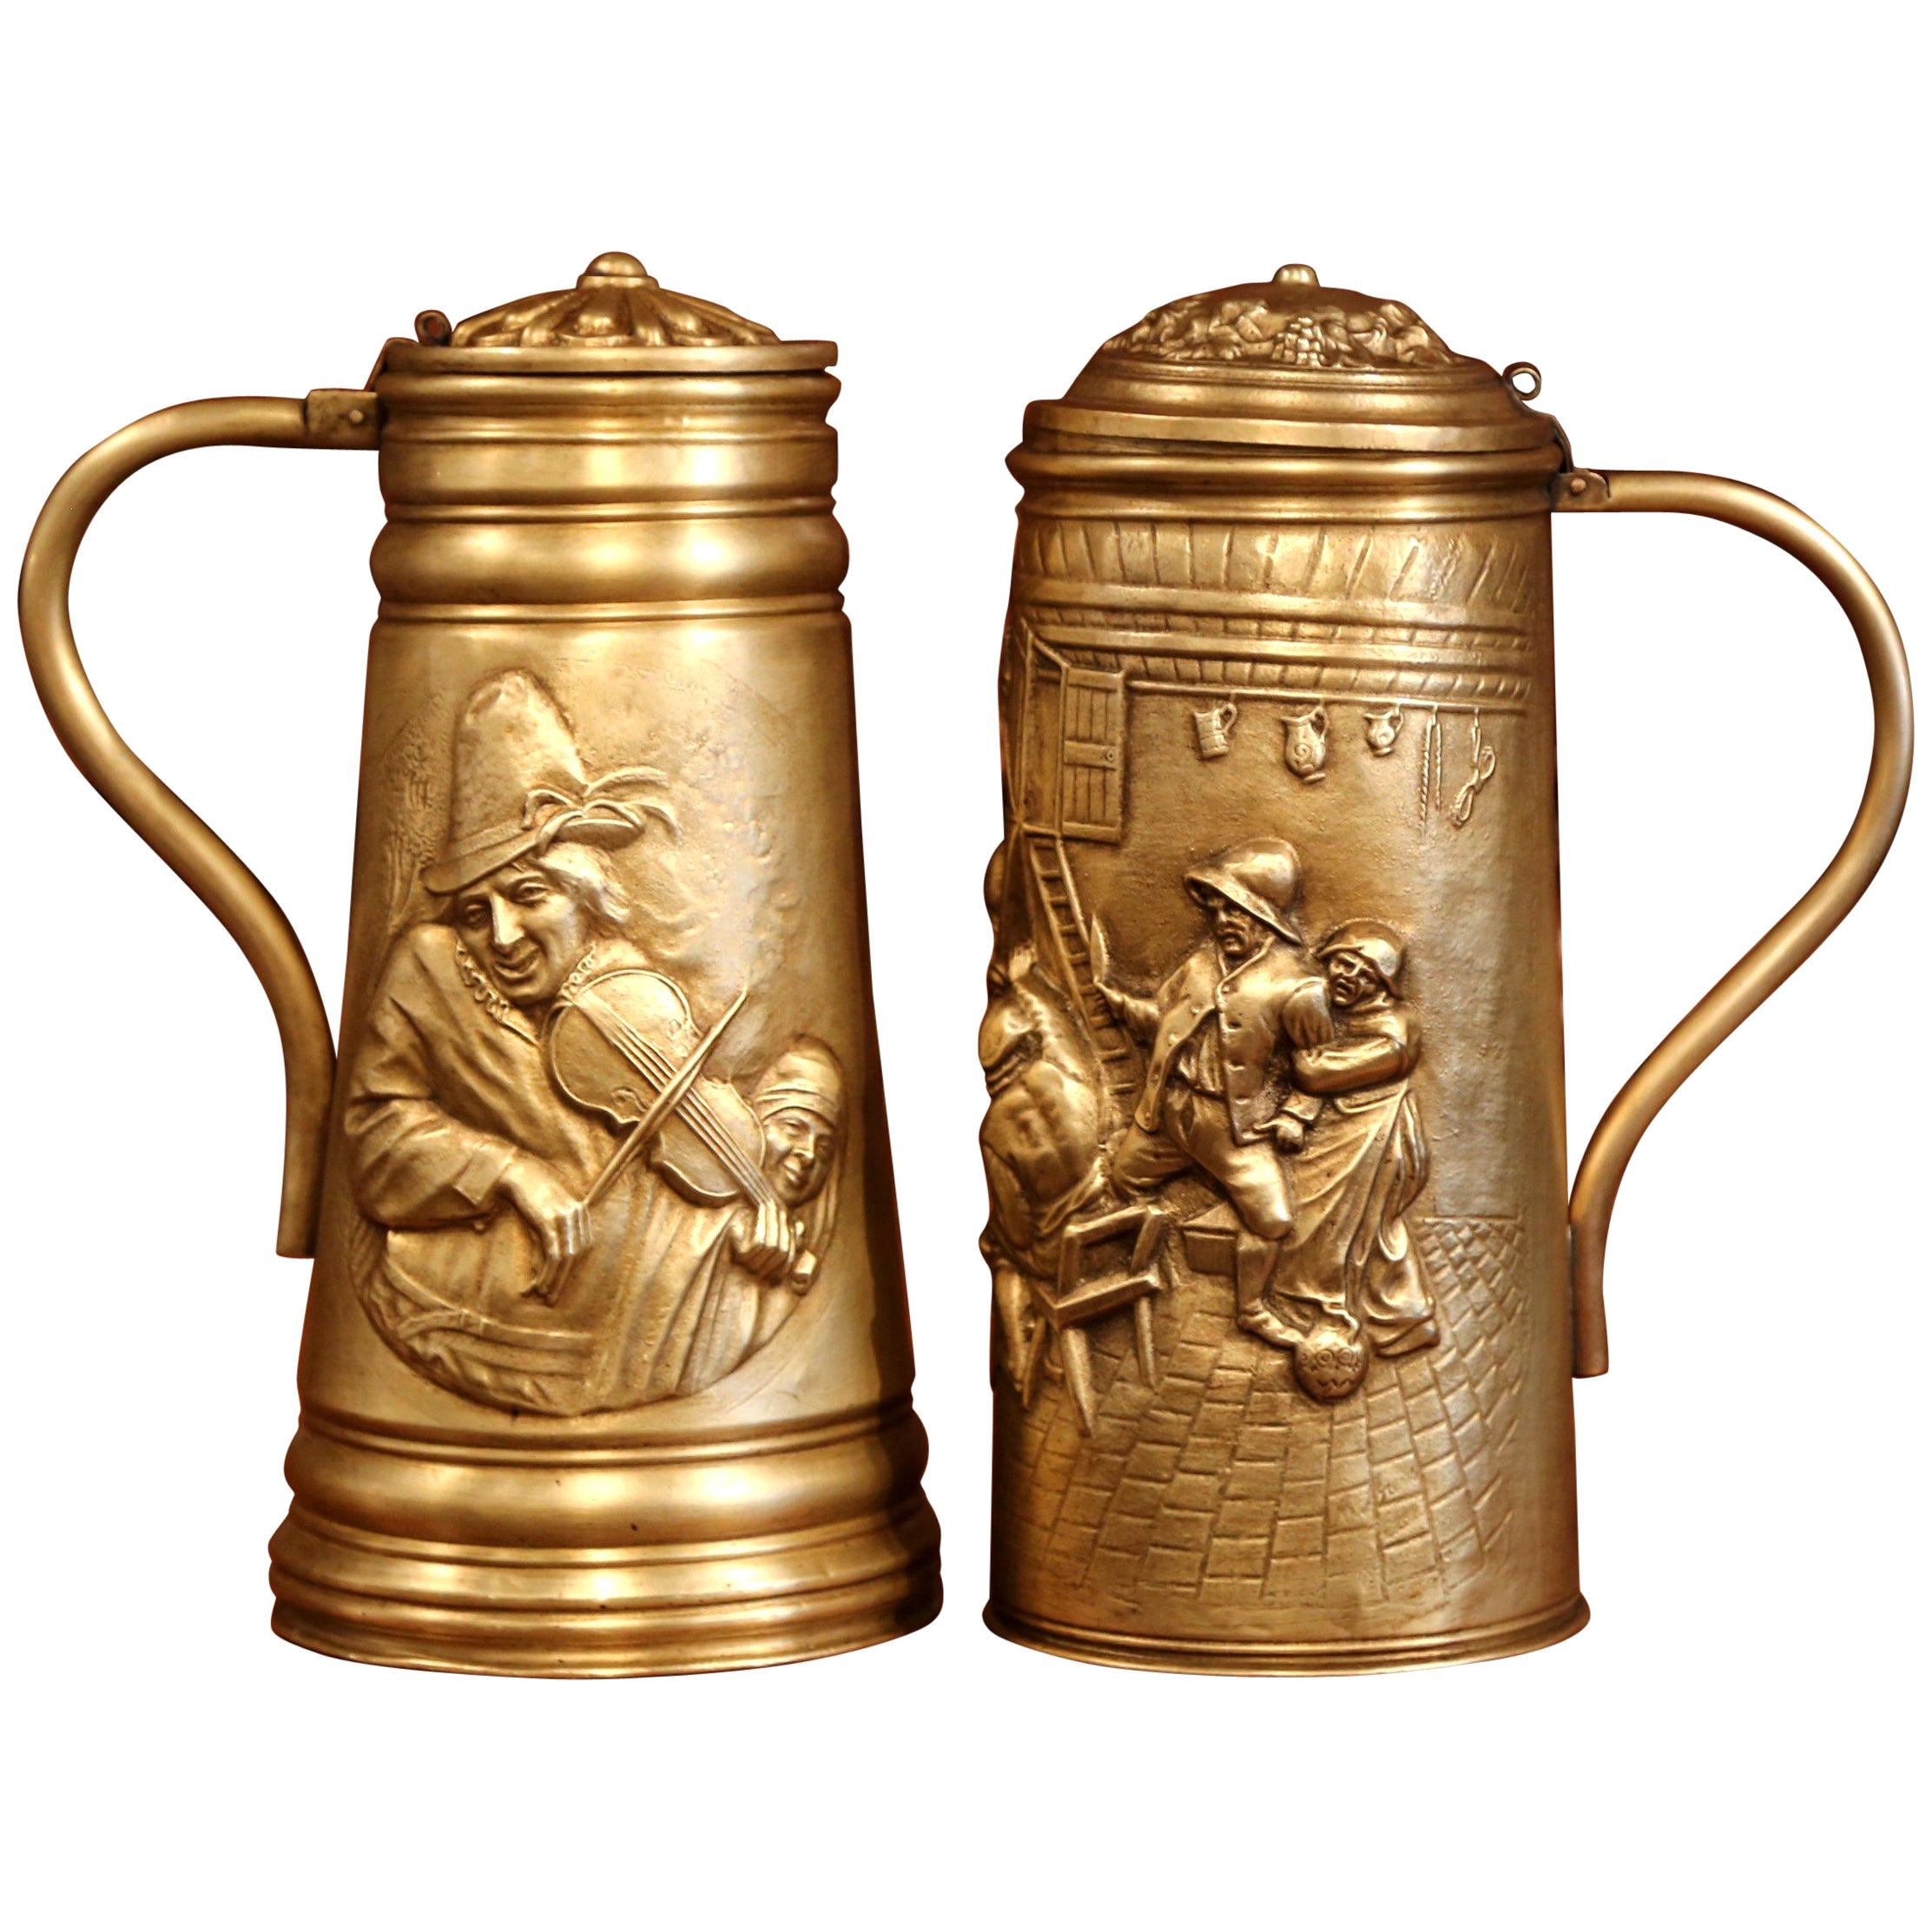 Pair of 19th Century Belgium Brass Beer Pitchers with Lid and Repousse Decor